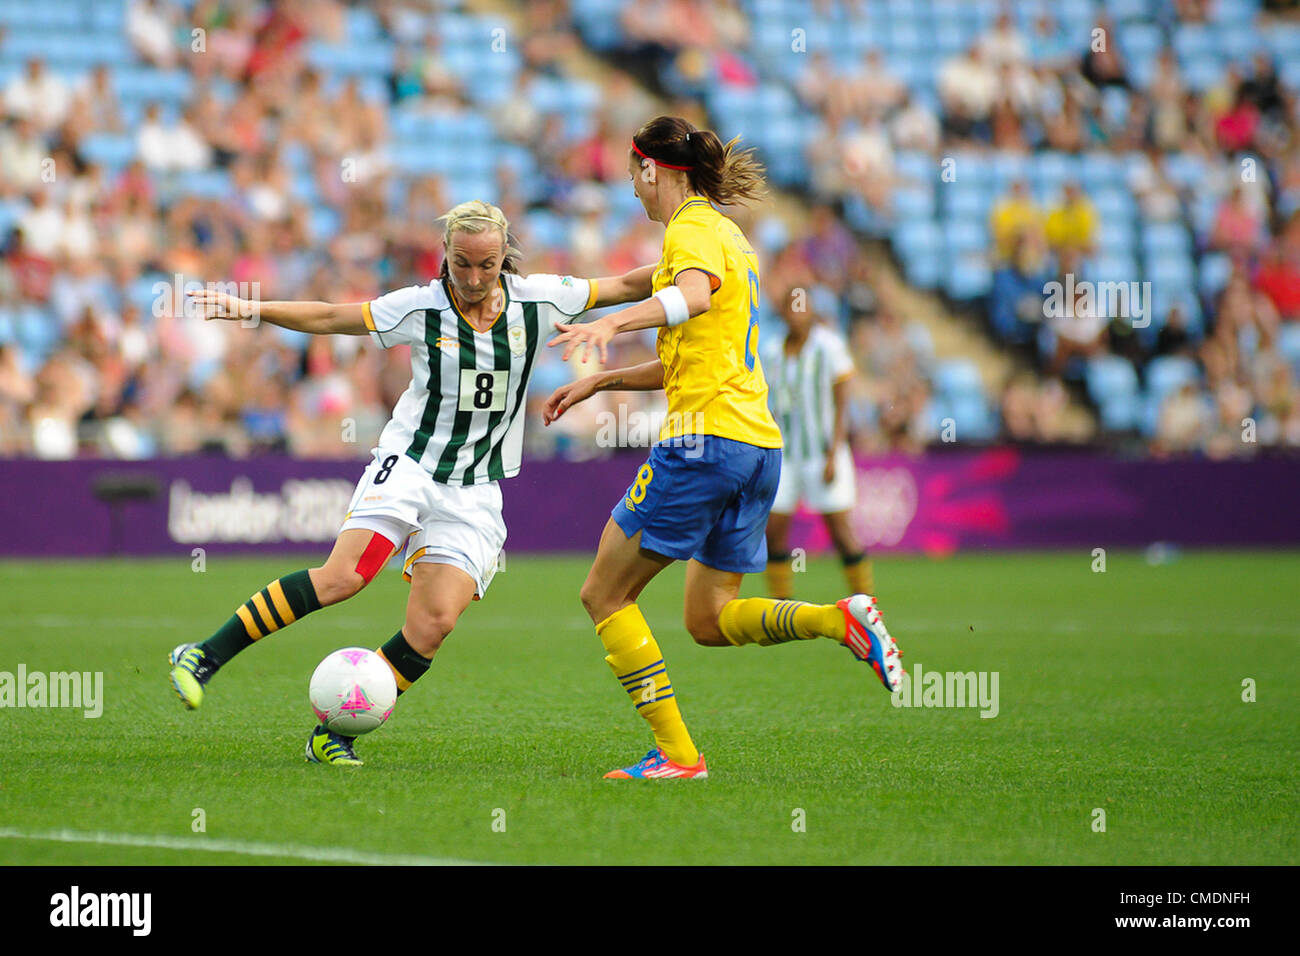 25.07.2012 Coventry, England. Kylie LOUW (South Africa) and Lotta SCHELIN (Sweden) in action during the Olympic Football Women's Preliminary game between Sweden and South Africa from the City of Coventry Stadium Stock Photo